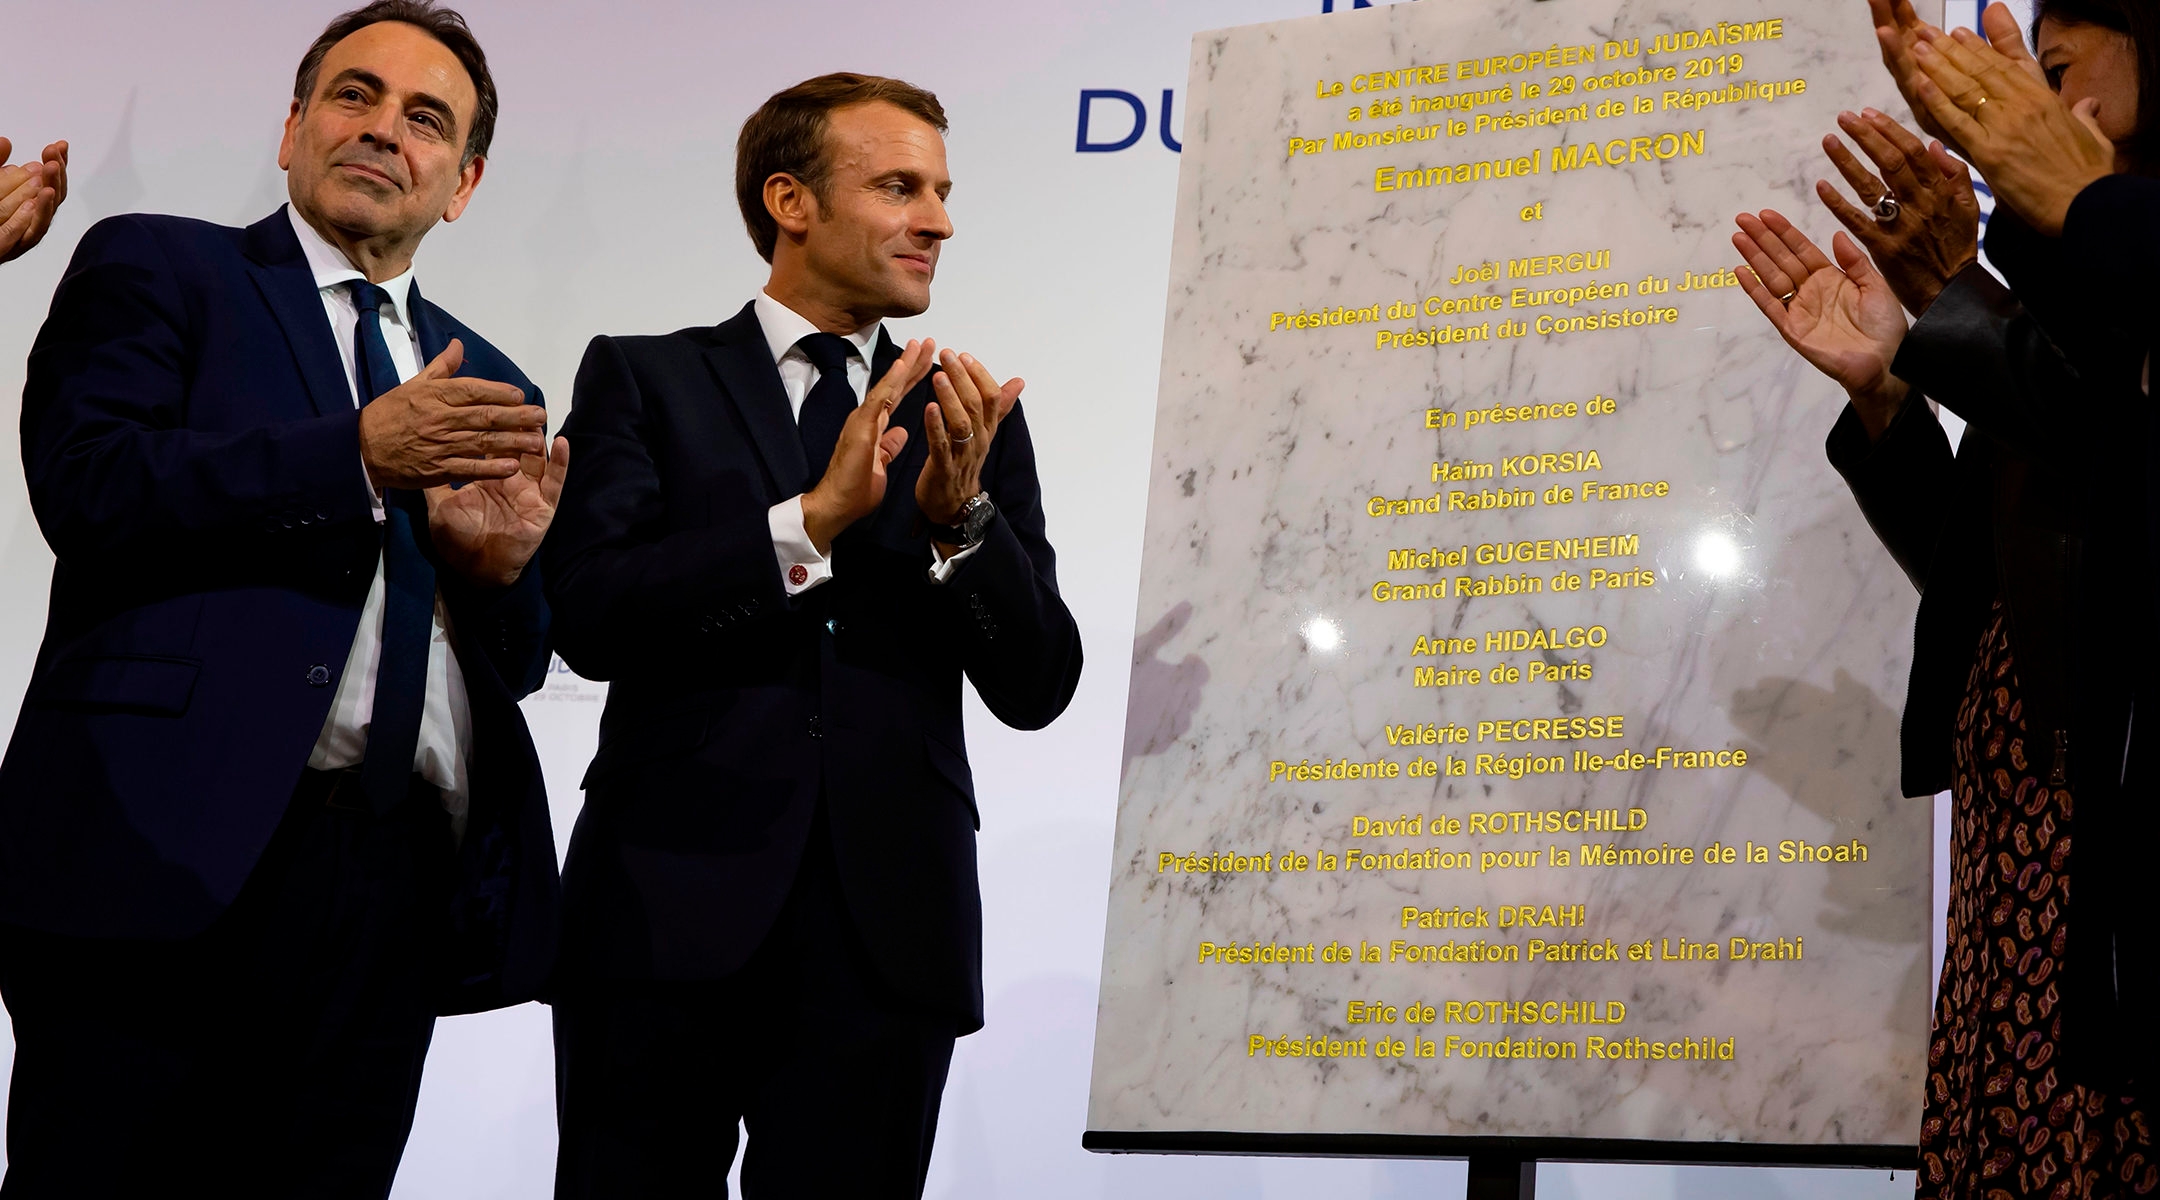 Consistoire President Joel Mergui, left, and French President Emmanuel Macron celebrating the inauguration in Paris, France of a new Jewish community center on Oct. 29, 2019.